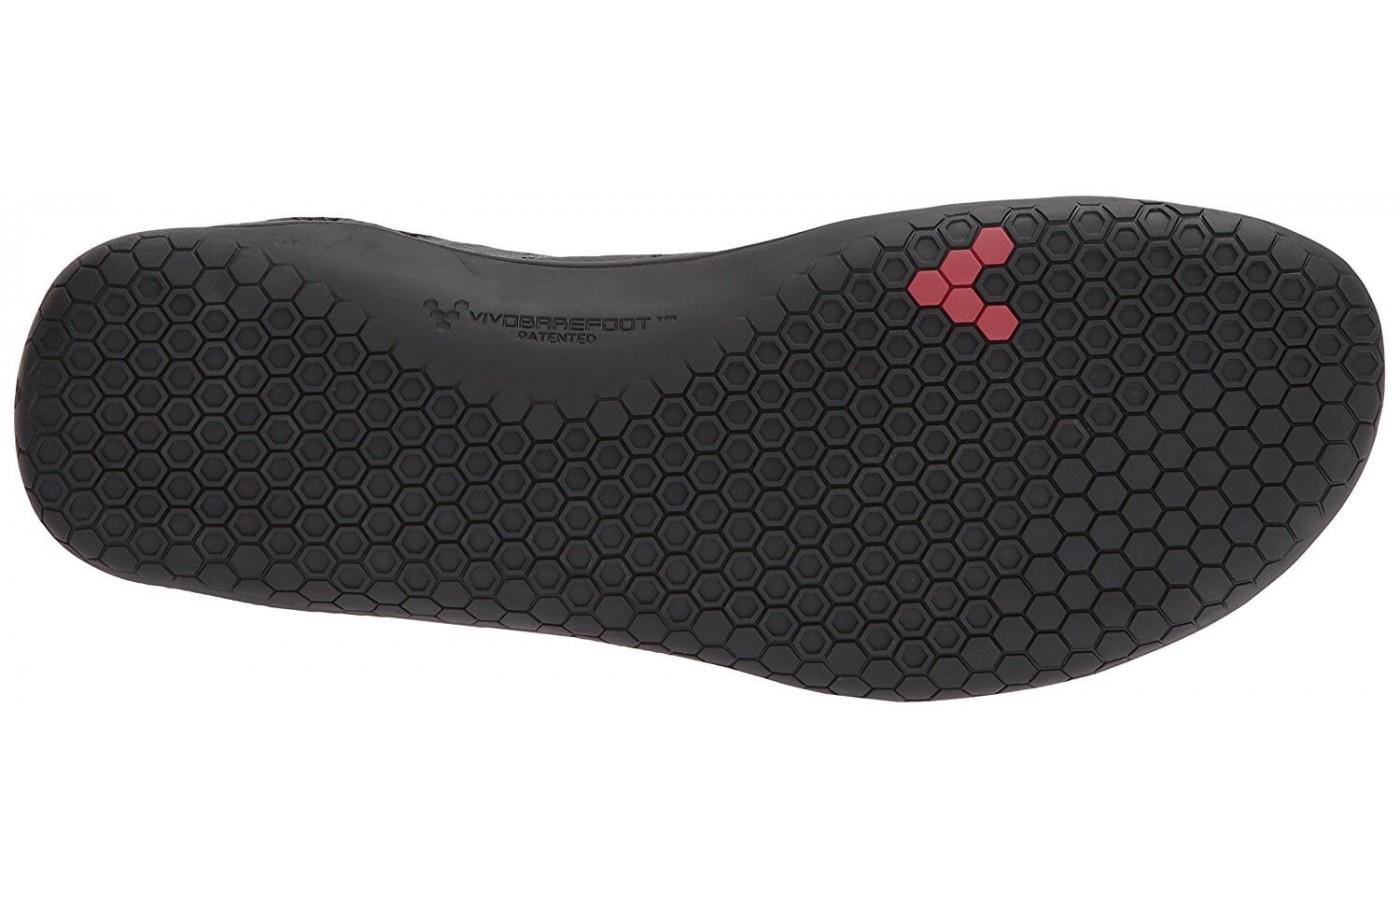 PRO5 lightweight puncture-resistant rubber is used for the outsole.